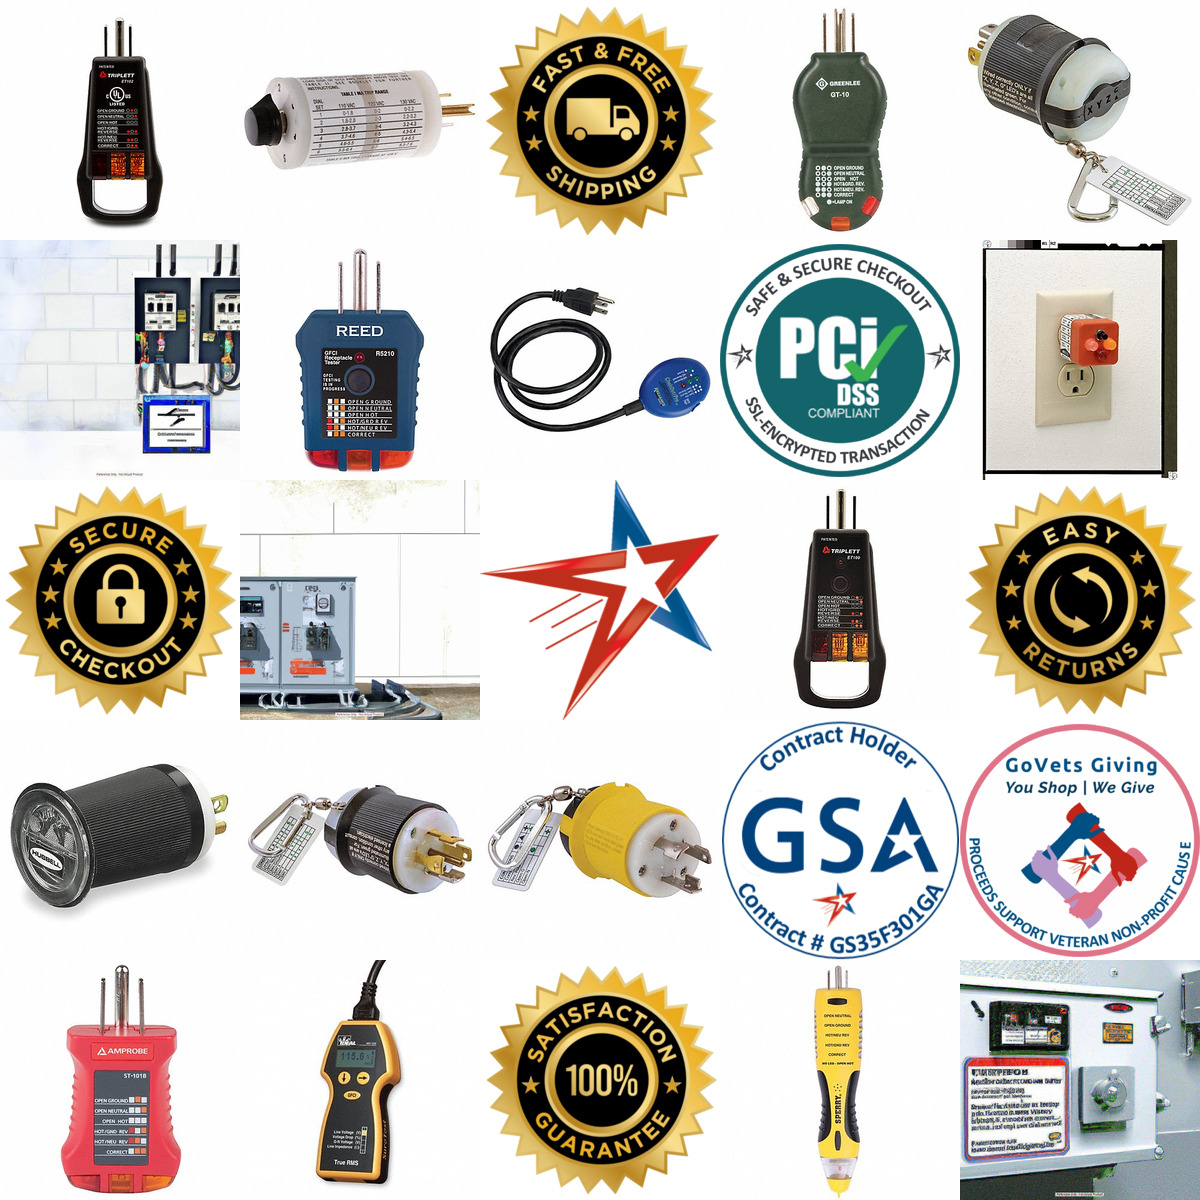 A selection of Receptacle Gfci Testers and Circuit Analyzers products on GoVets